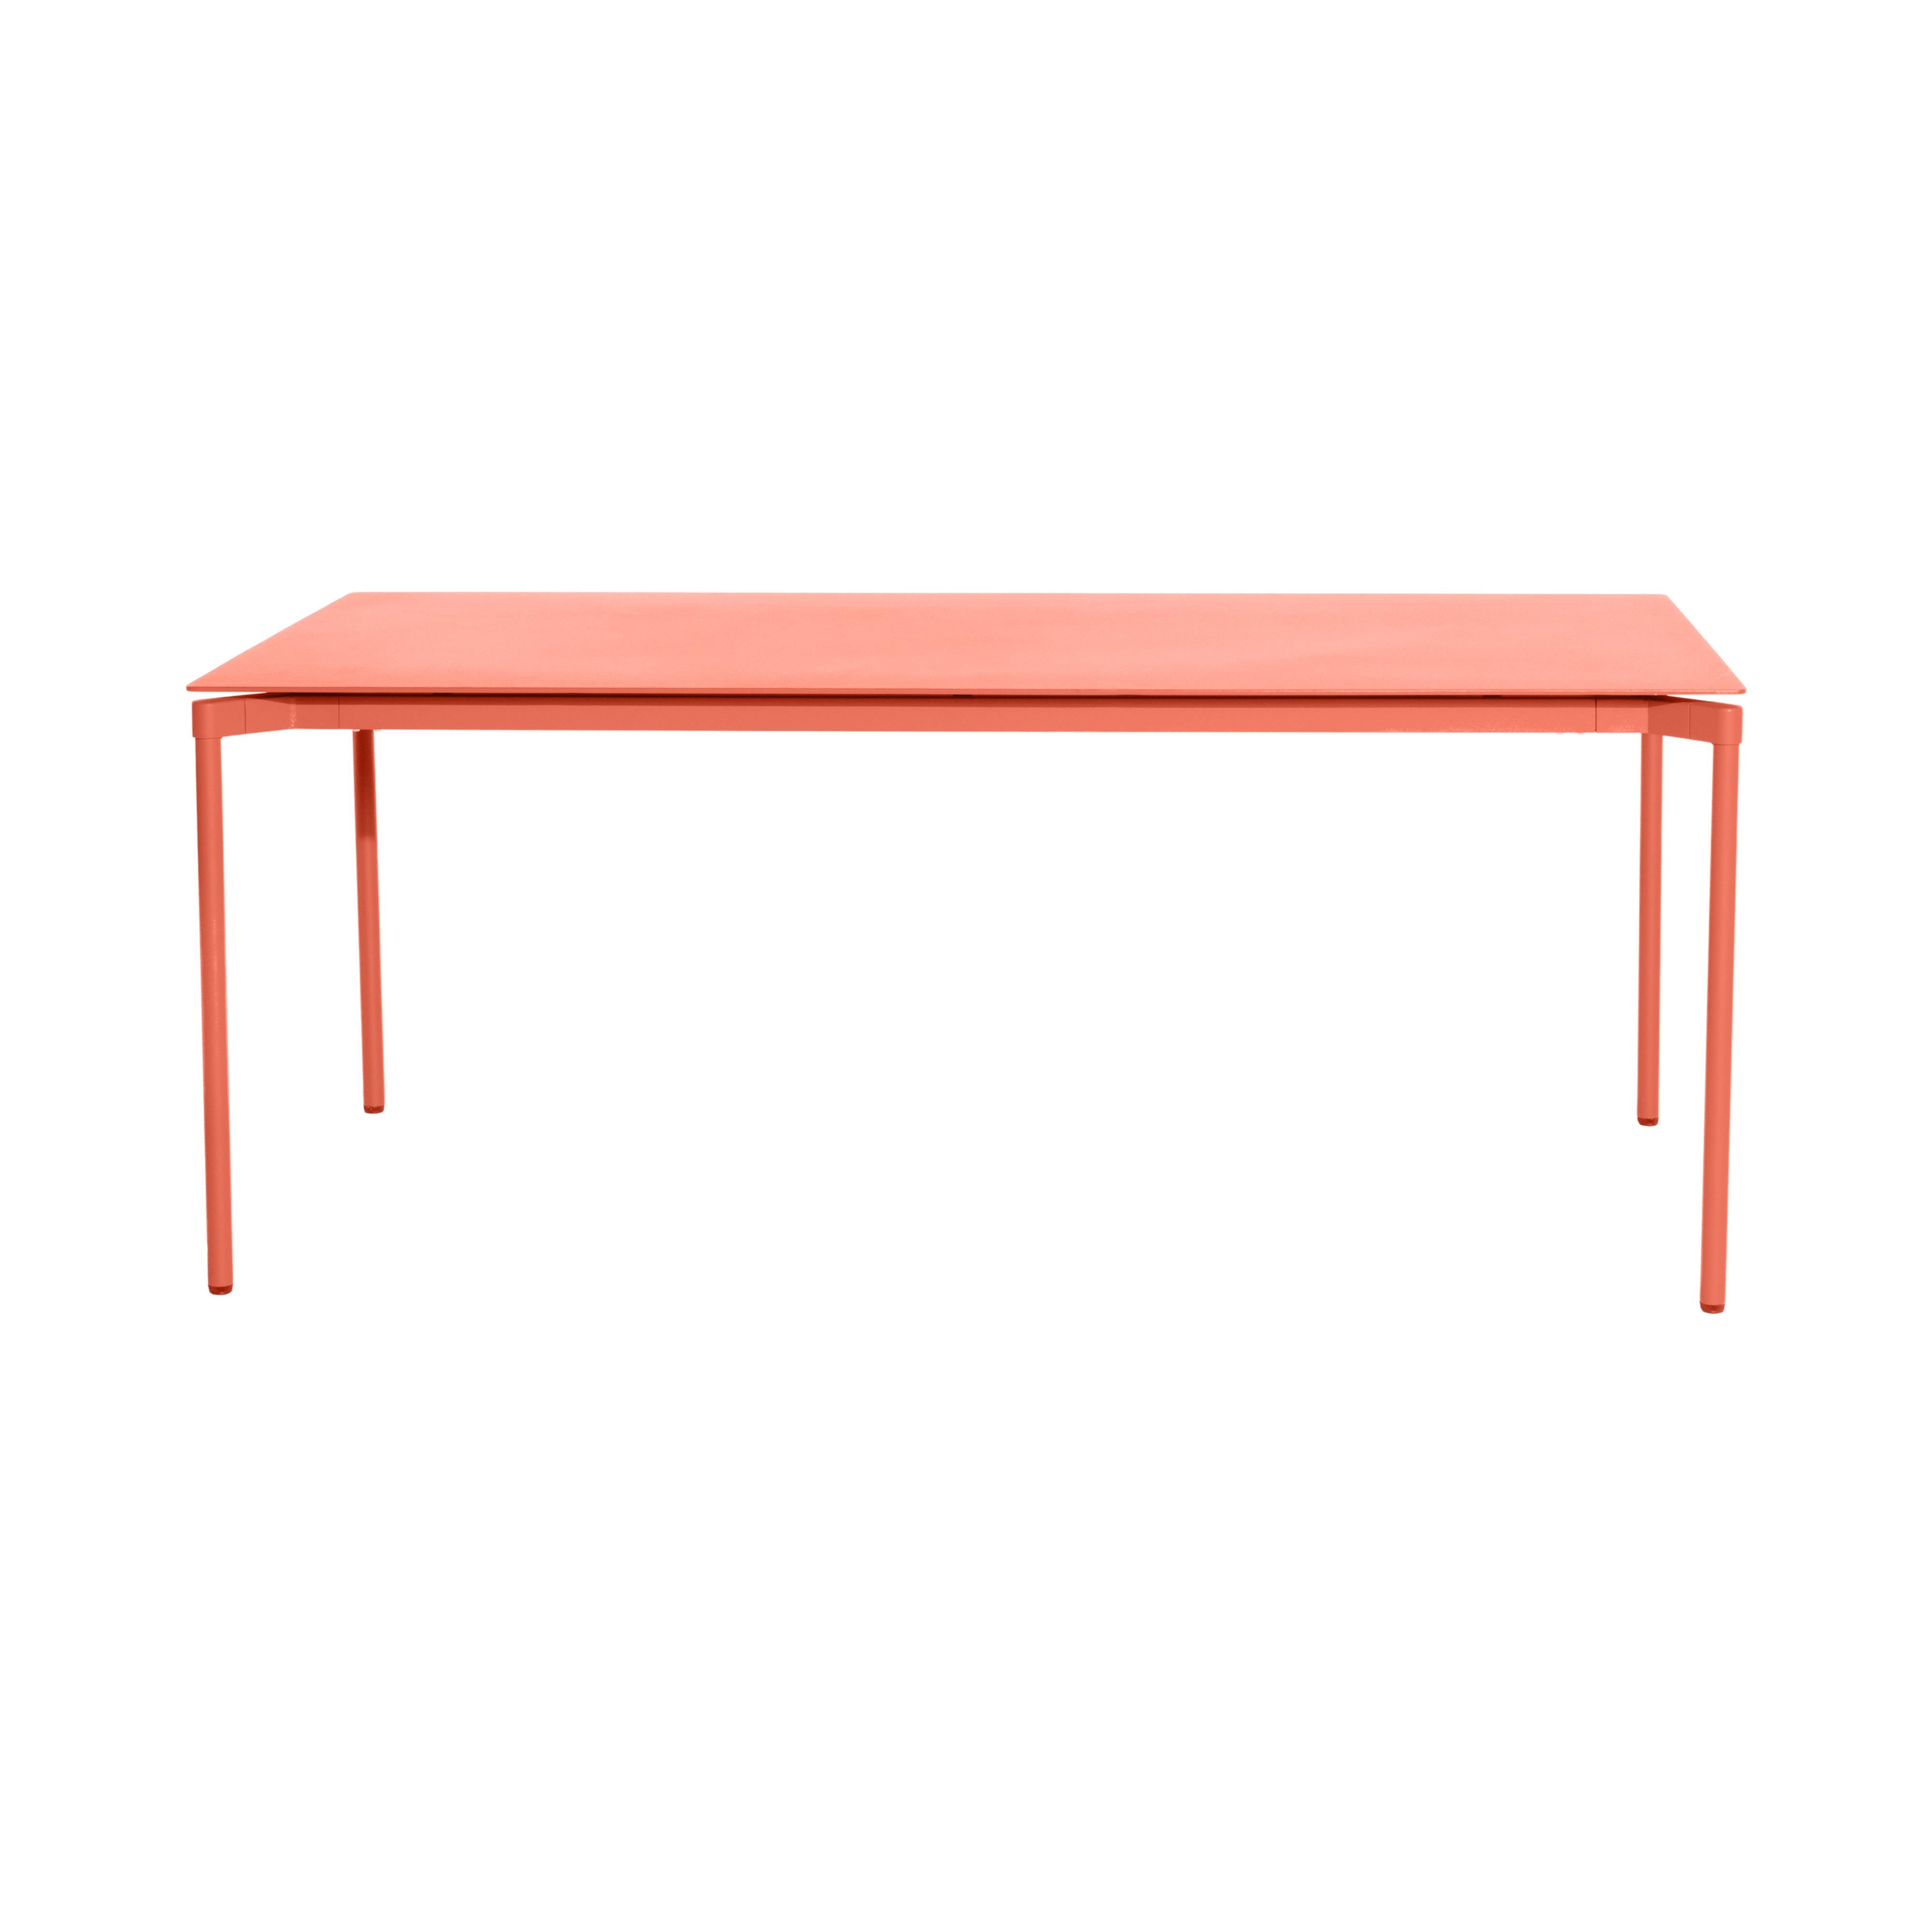 Fromme Dining Table: Outdoor + Rectangle + Coral